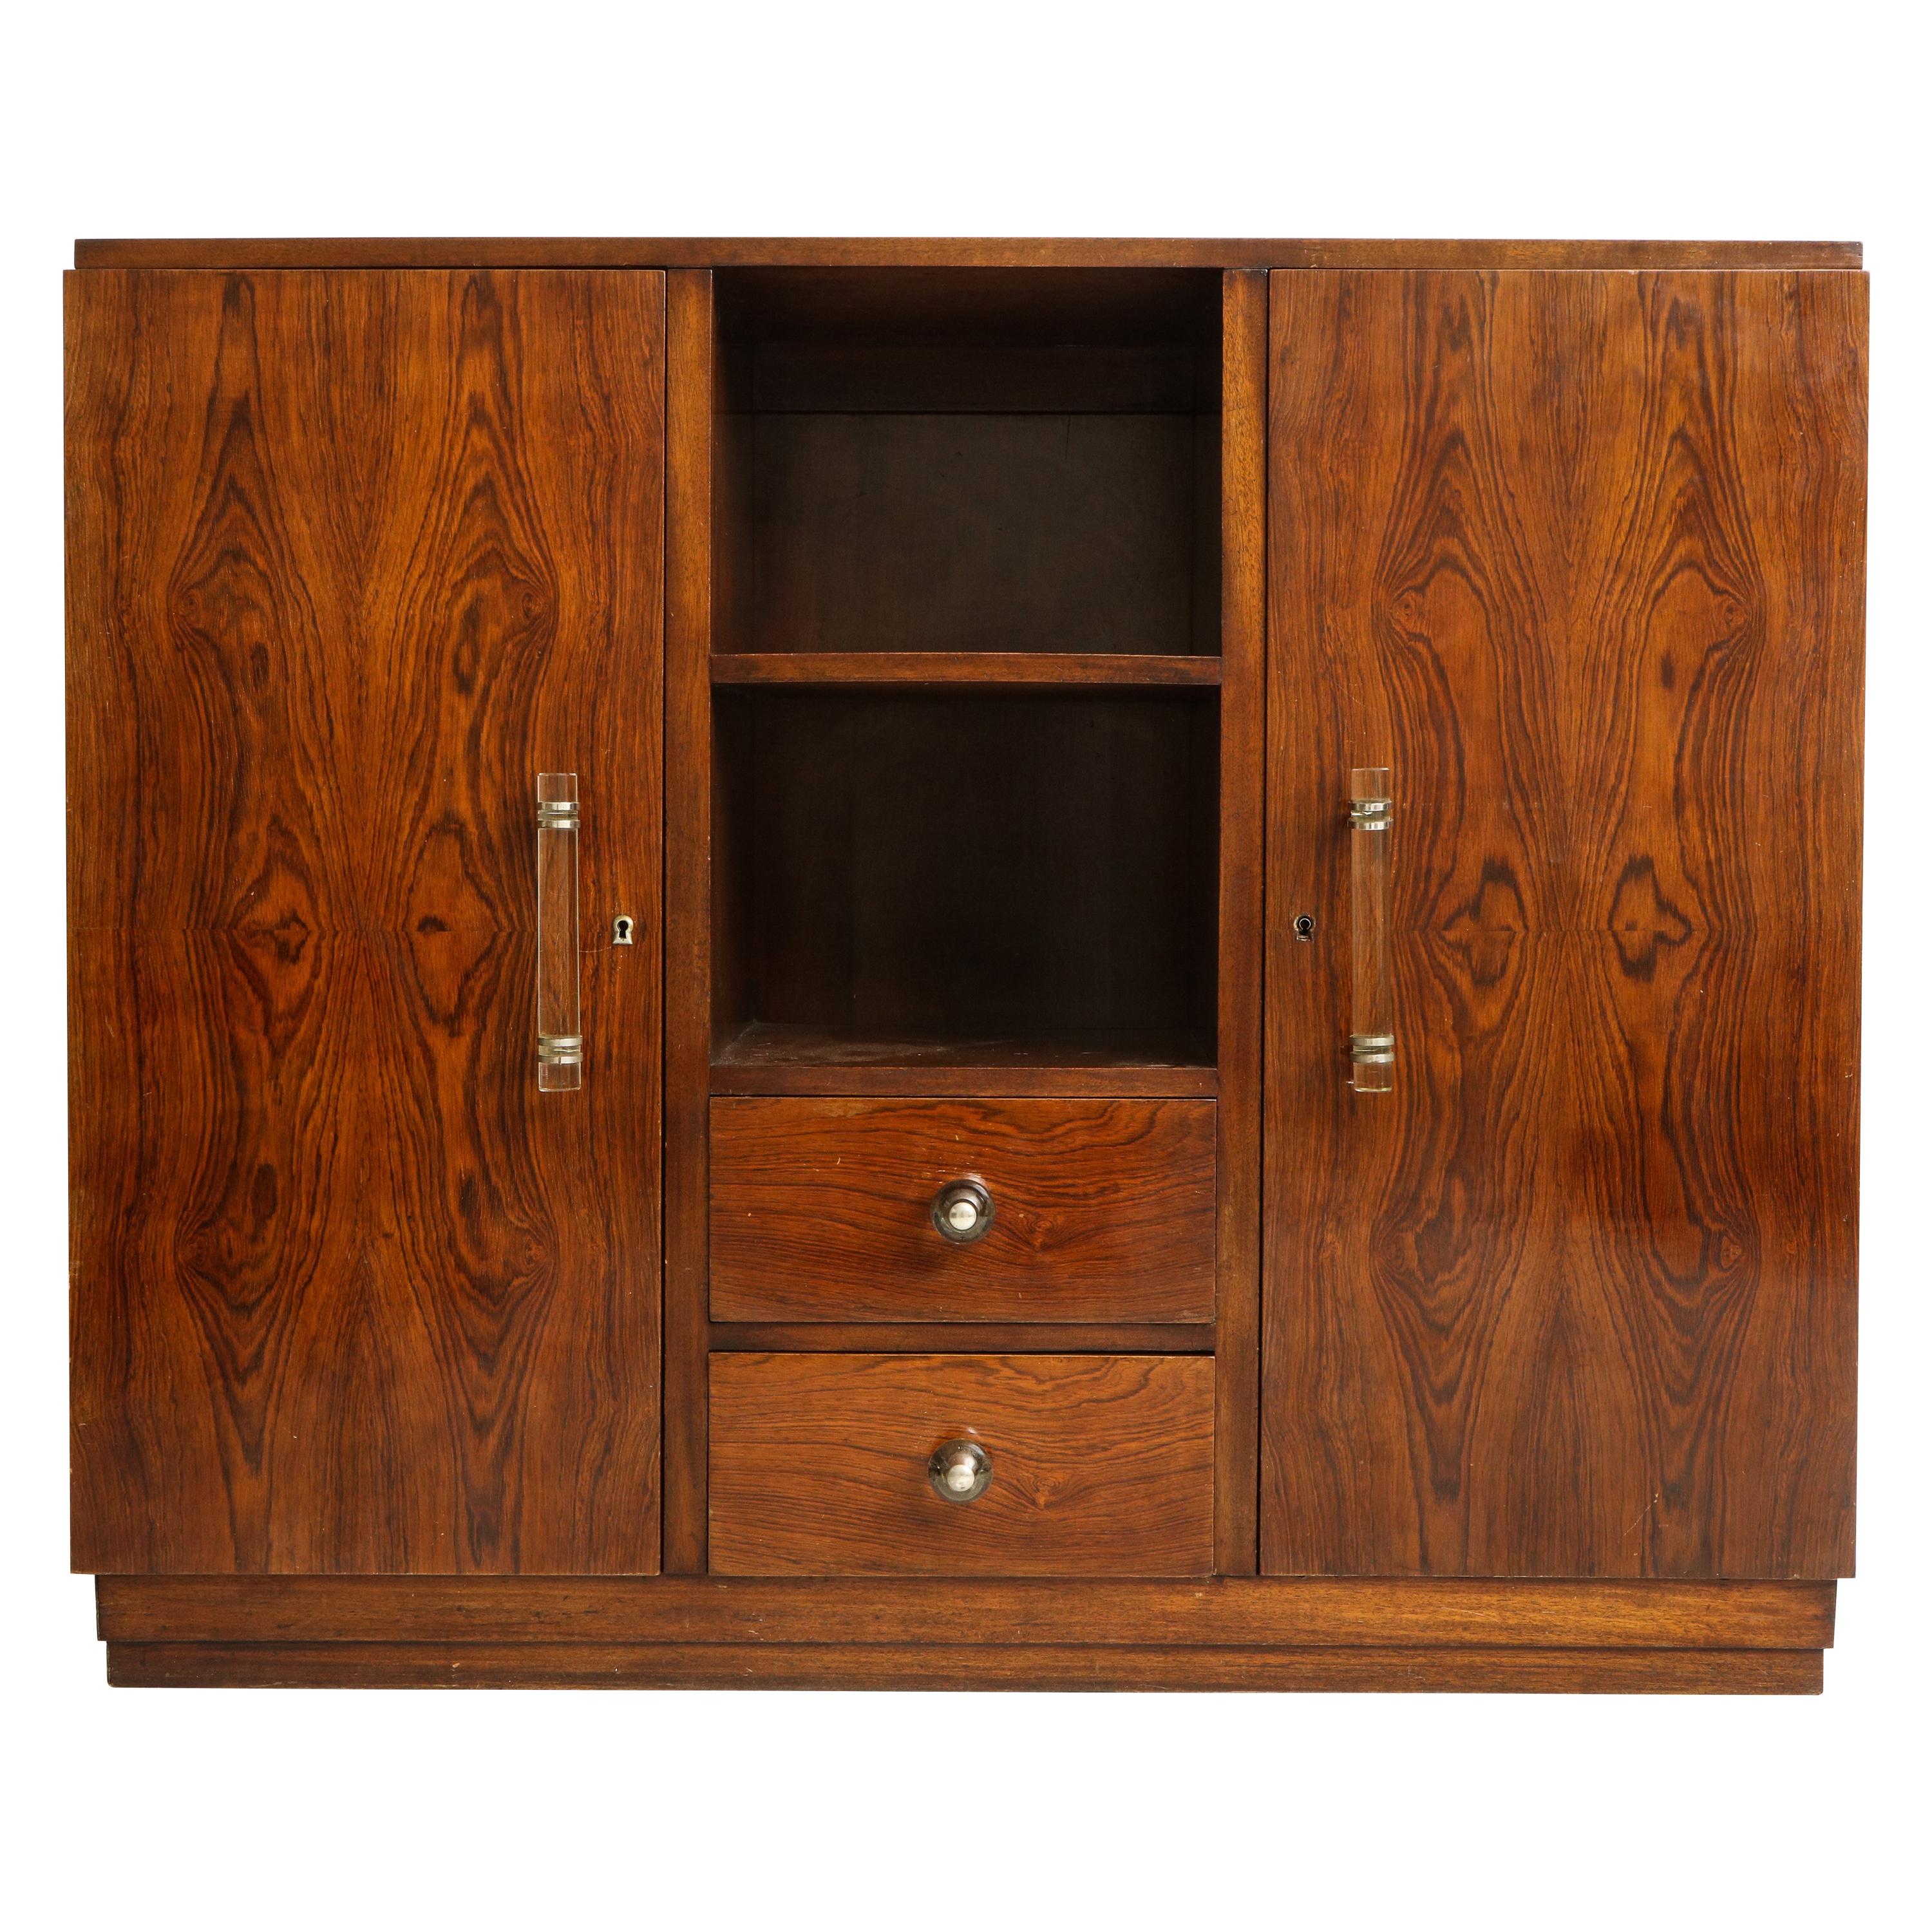 Rosewood, Deco Cabinet with Glass Handles in Jacques Adnet Style, France, 1940